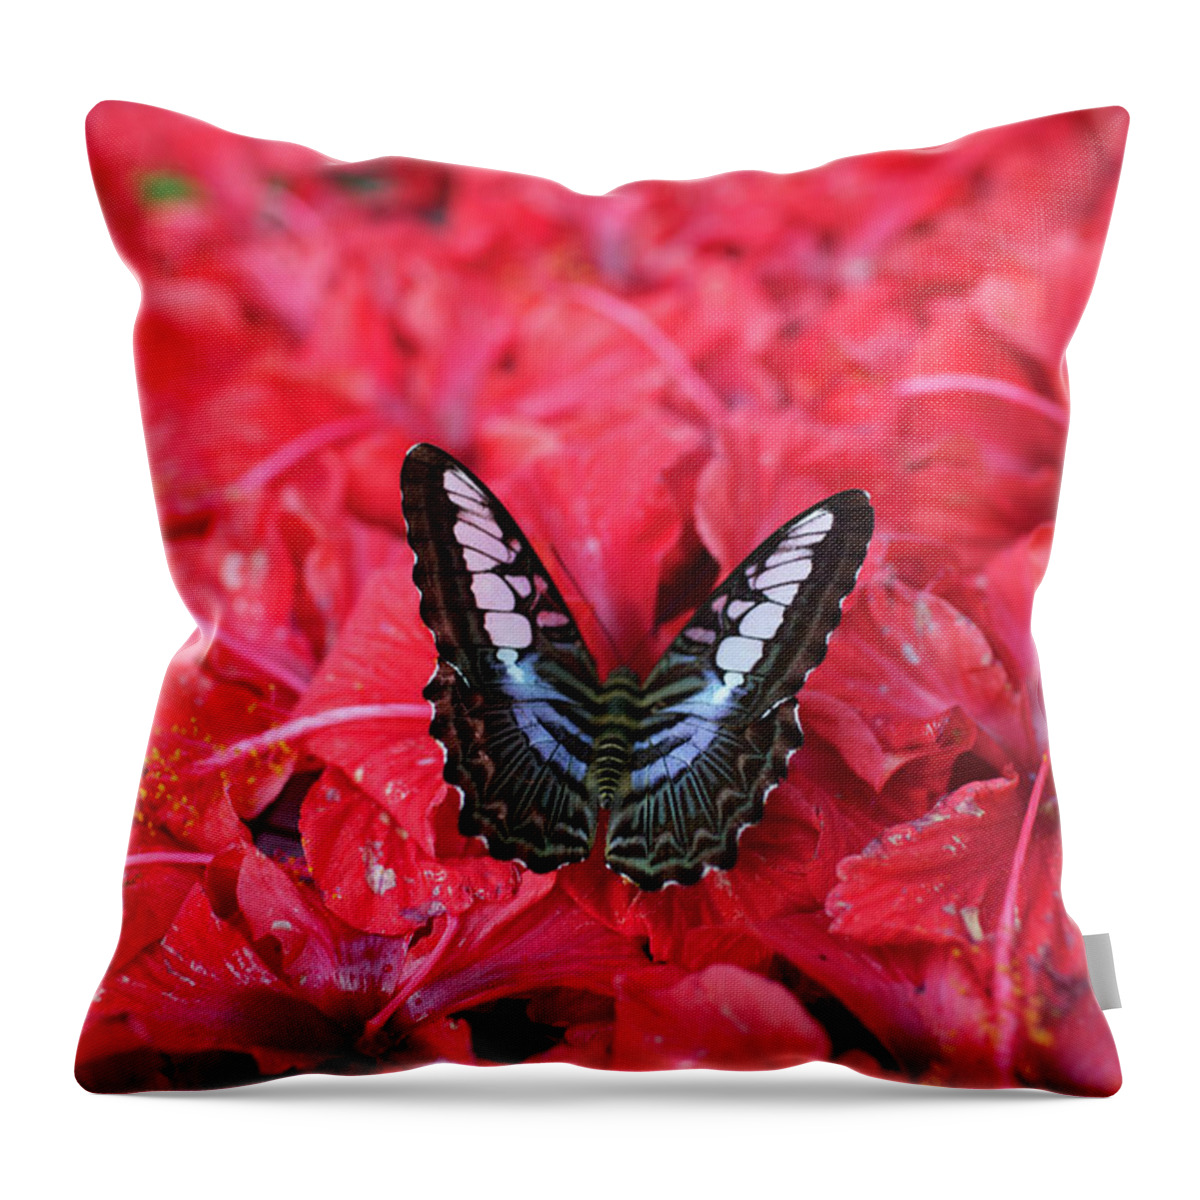 Insect Throw Pillow featuring the photograph Butterfly by Aleksandr Morozov